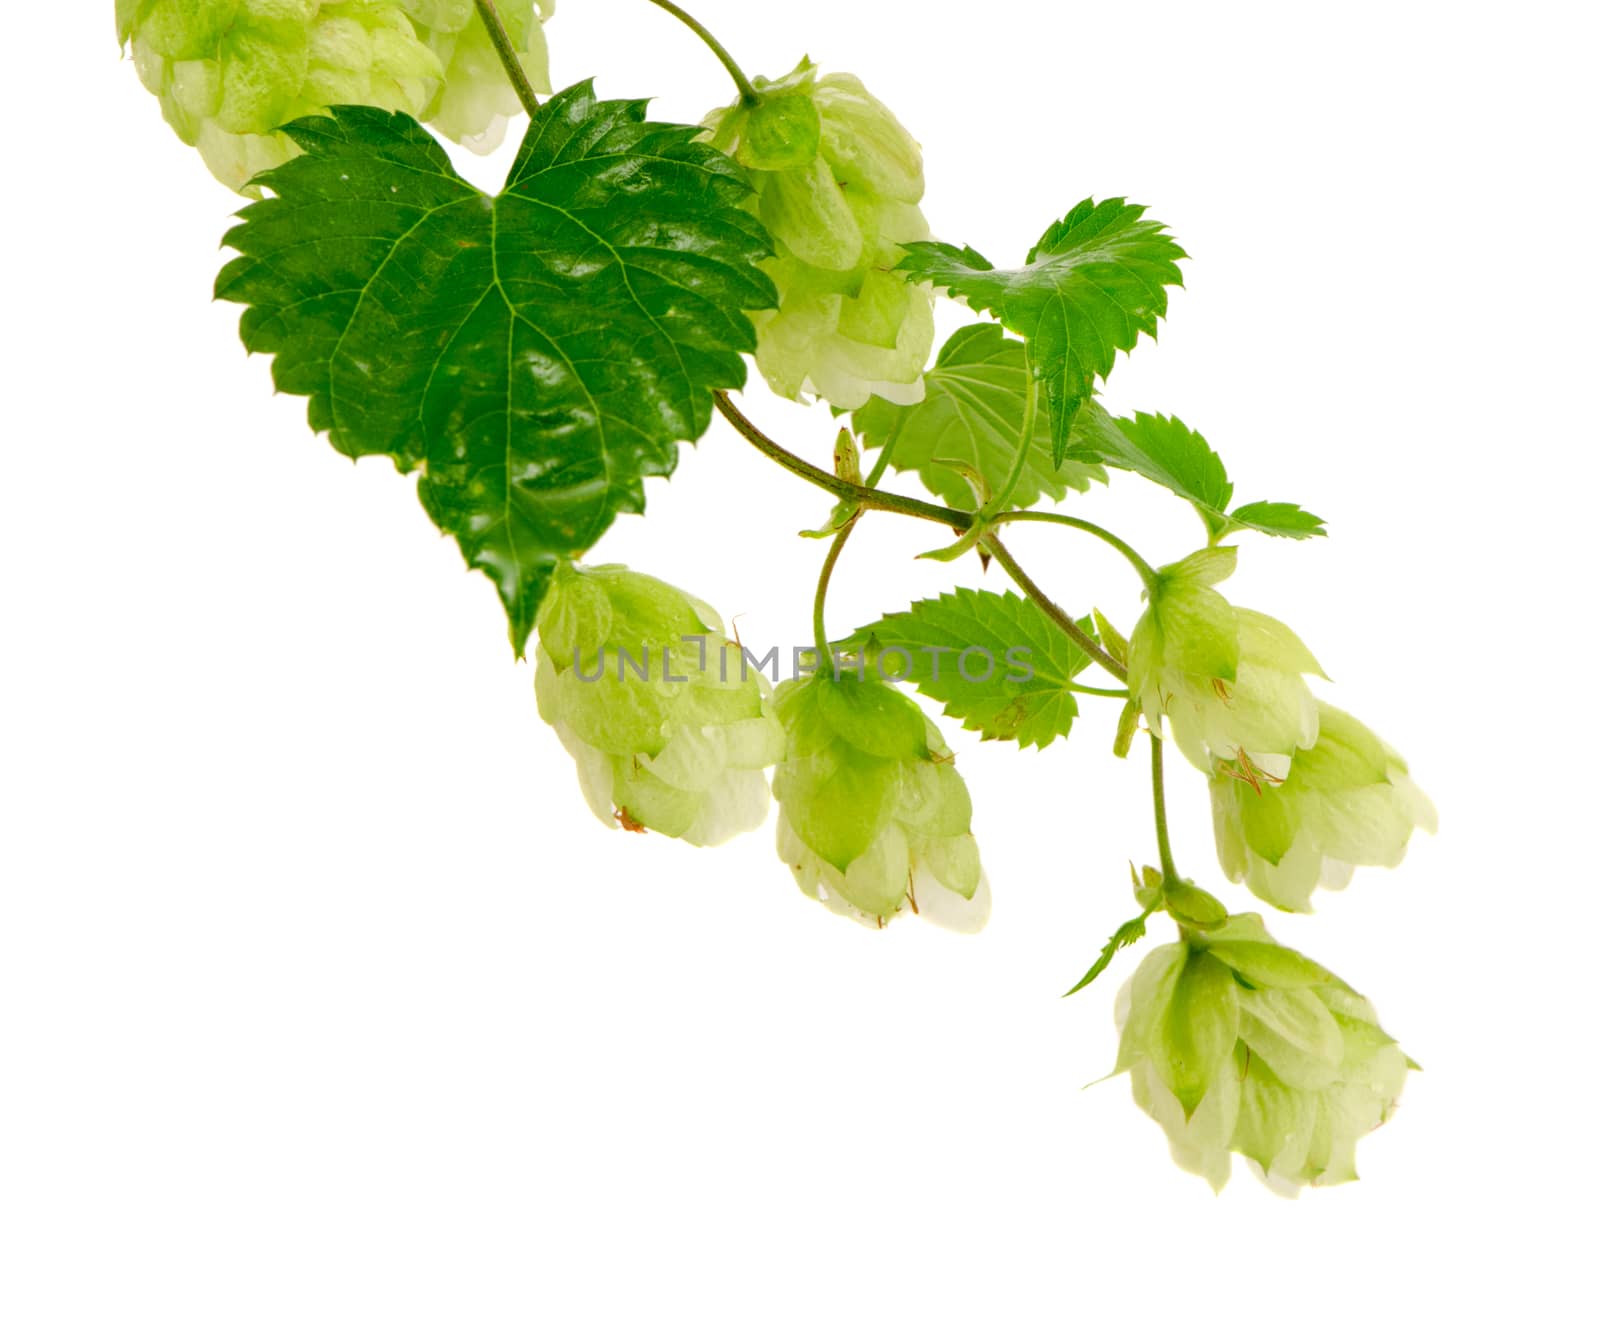 hop plant branch isolated on white background. natural beer production ingredient.